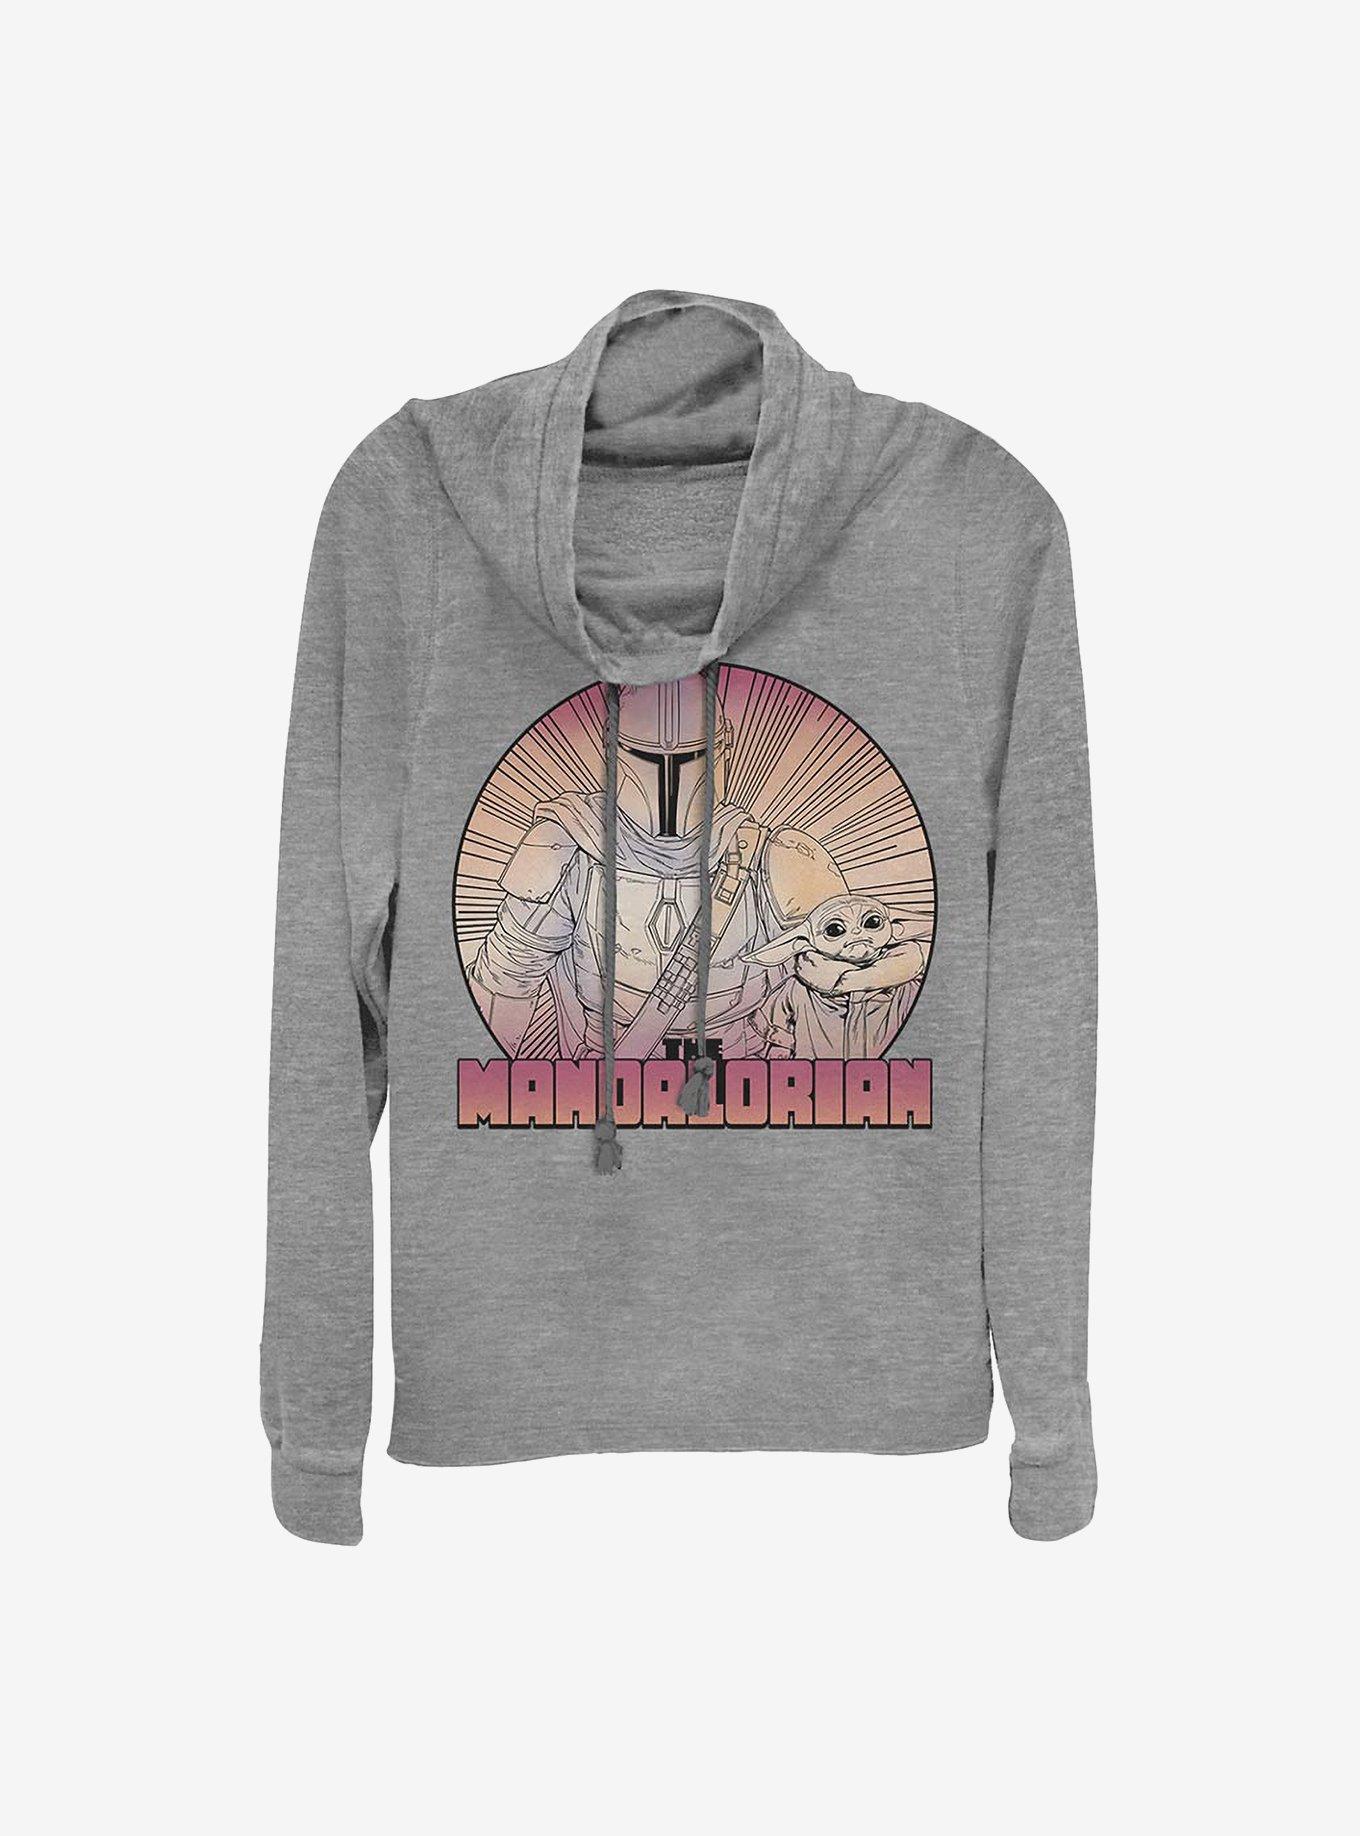 Star Wars The Mandalorian Inside The Lines Cowlneck Long-Sleeve Girls Top, GRAY HTR, hi-res